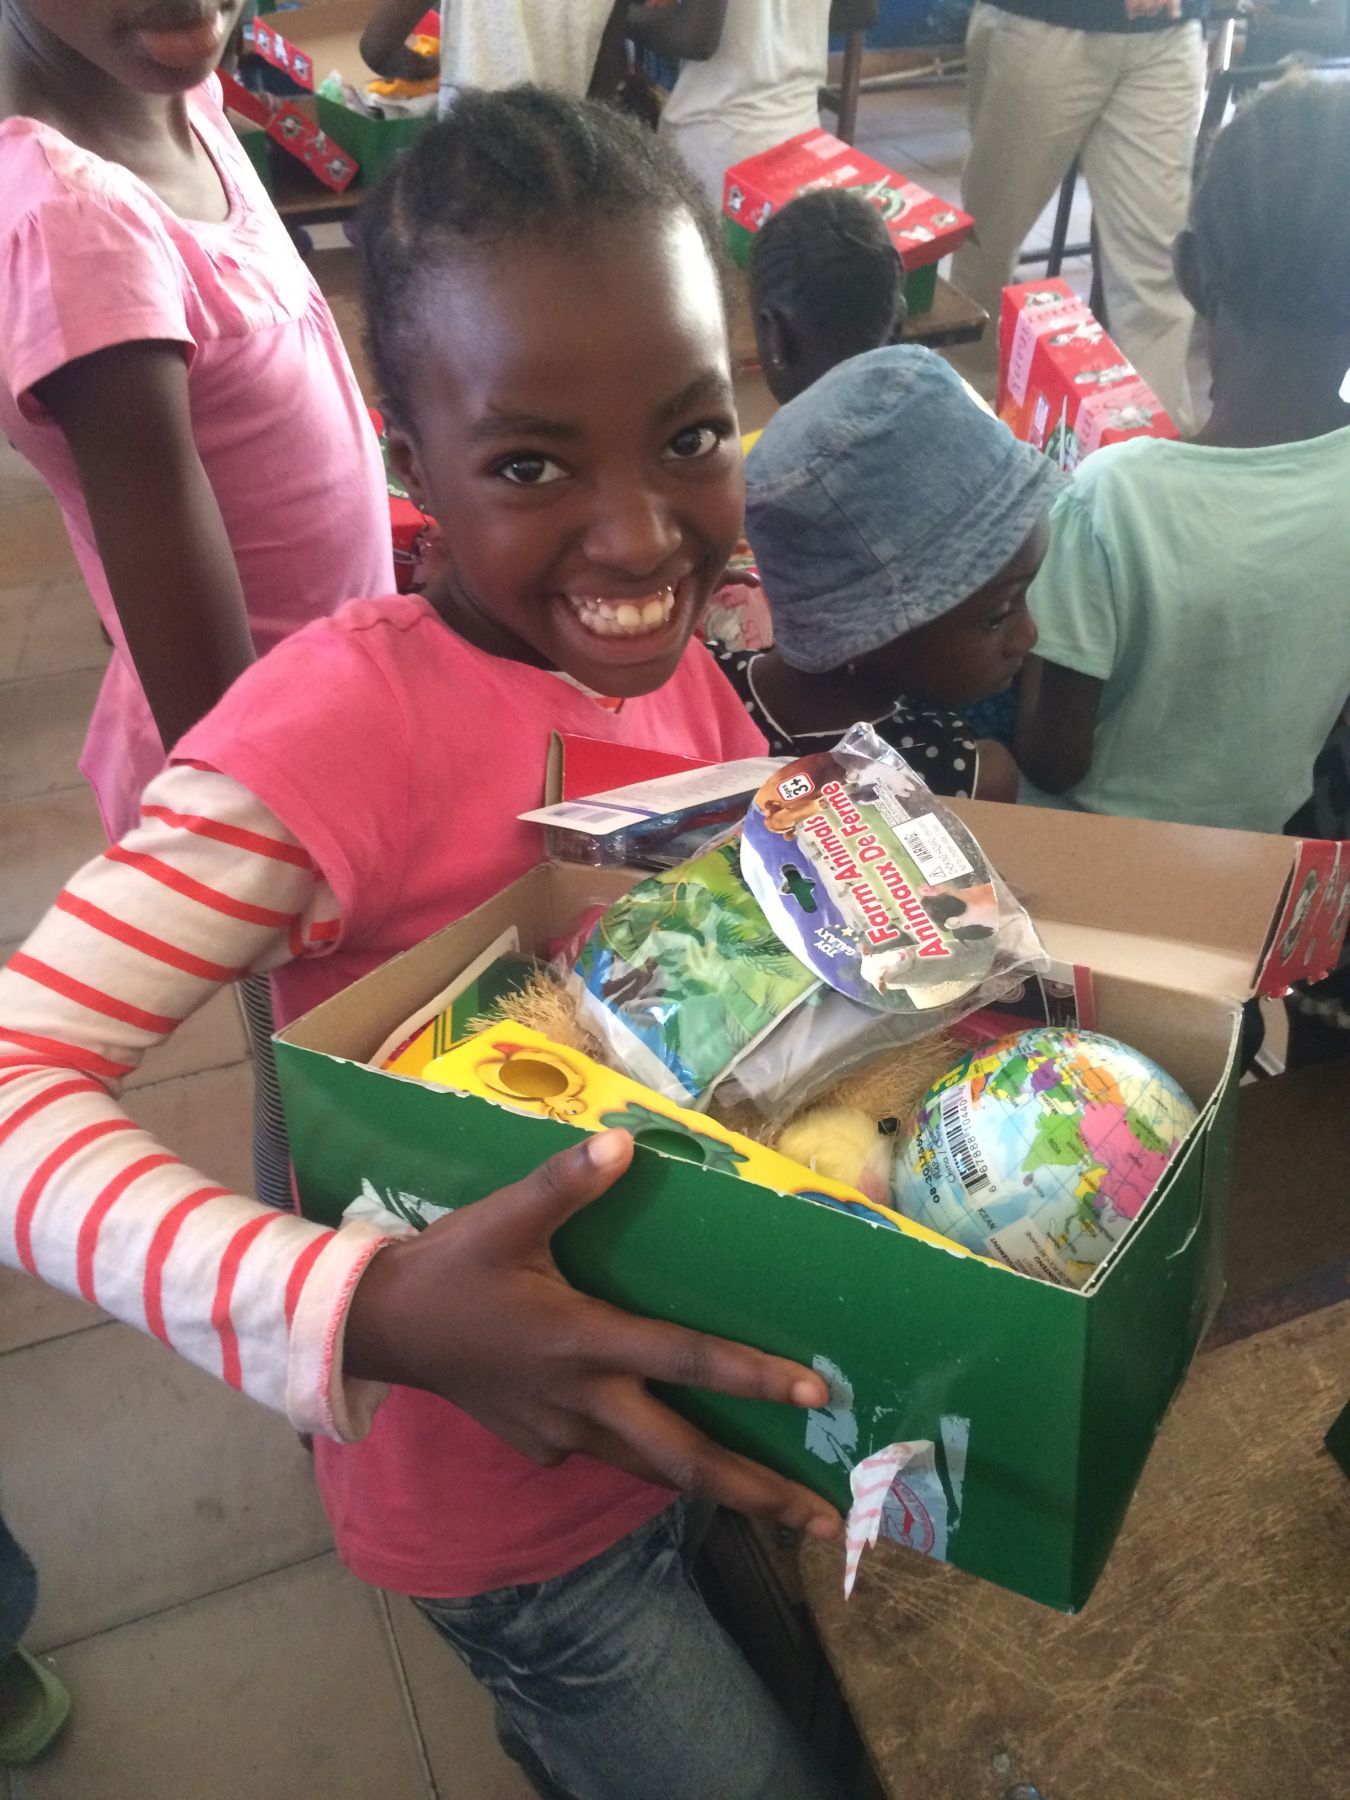 This little girl loved the items that were lovingly packed in her shoebox.